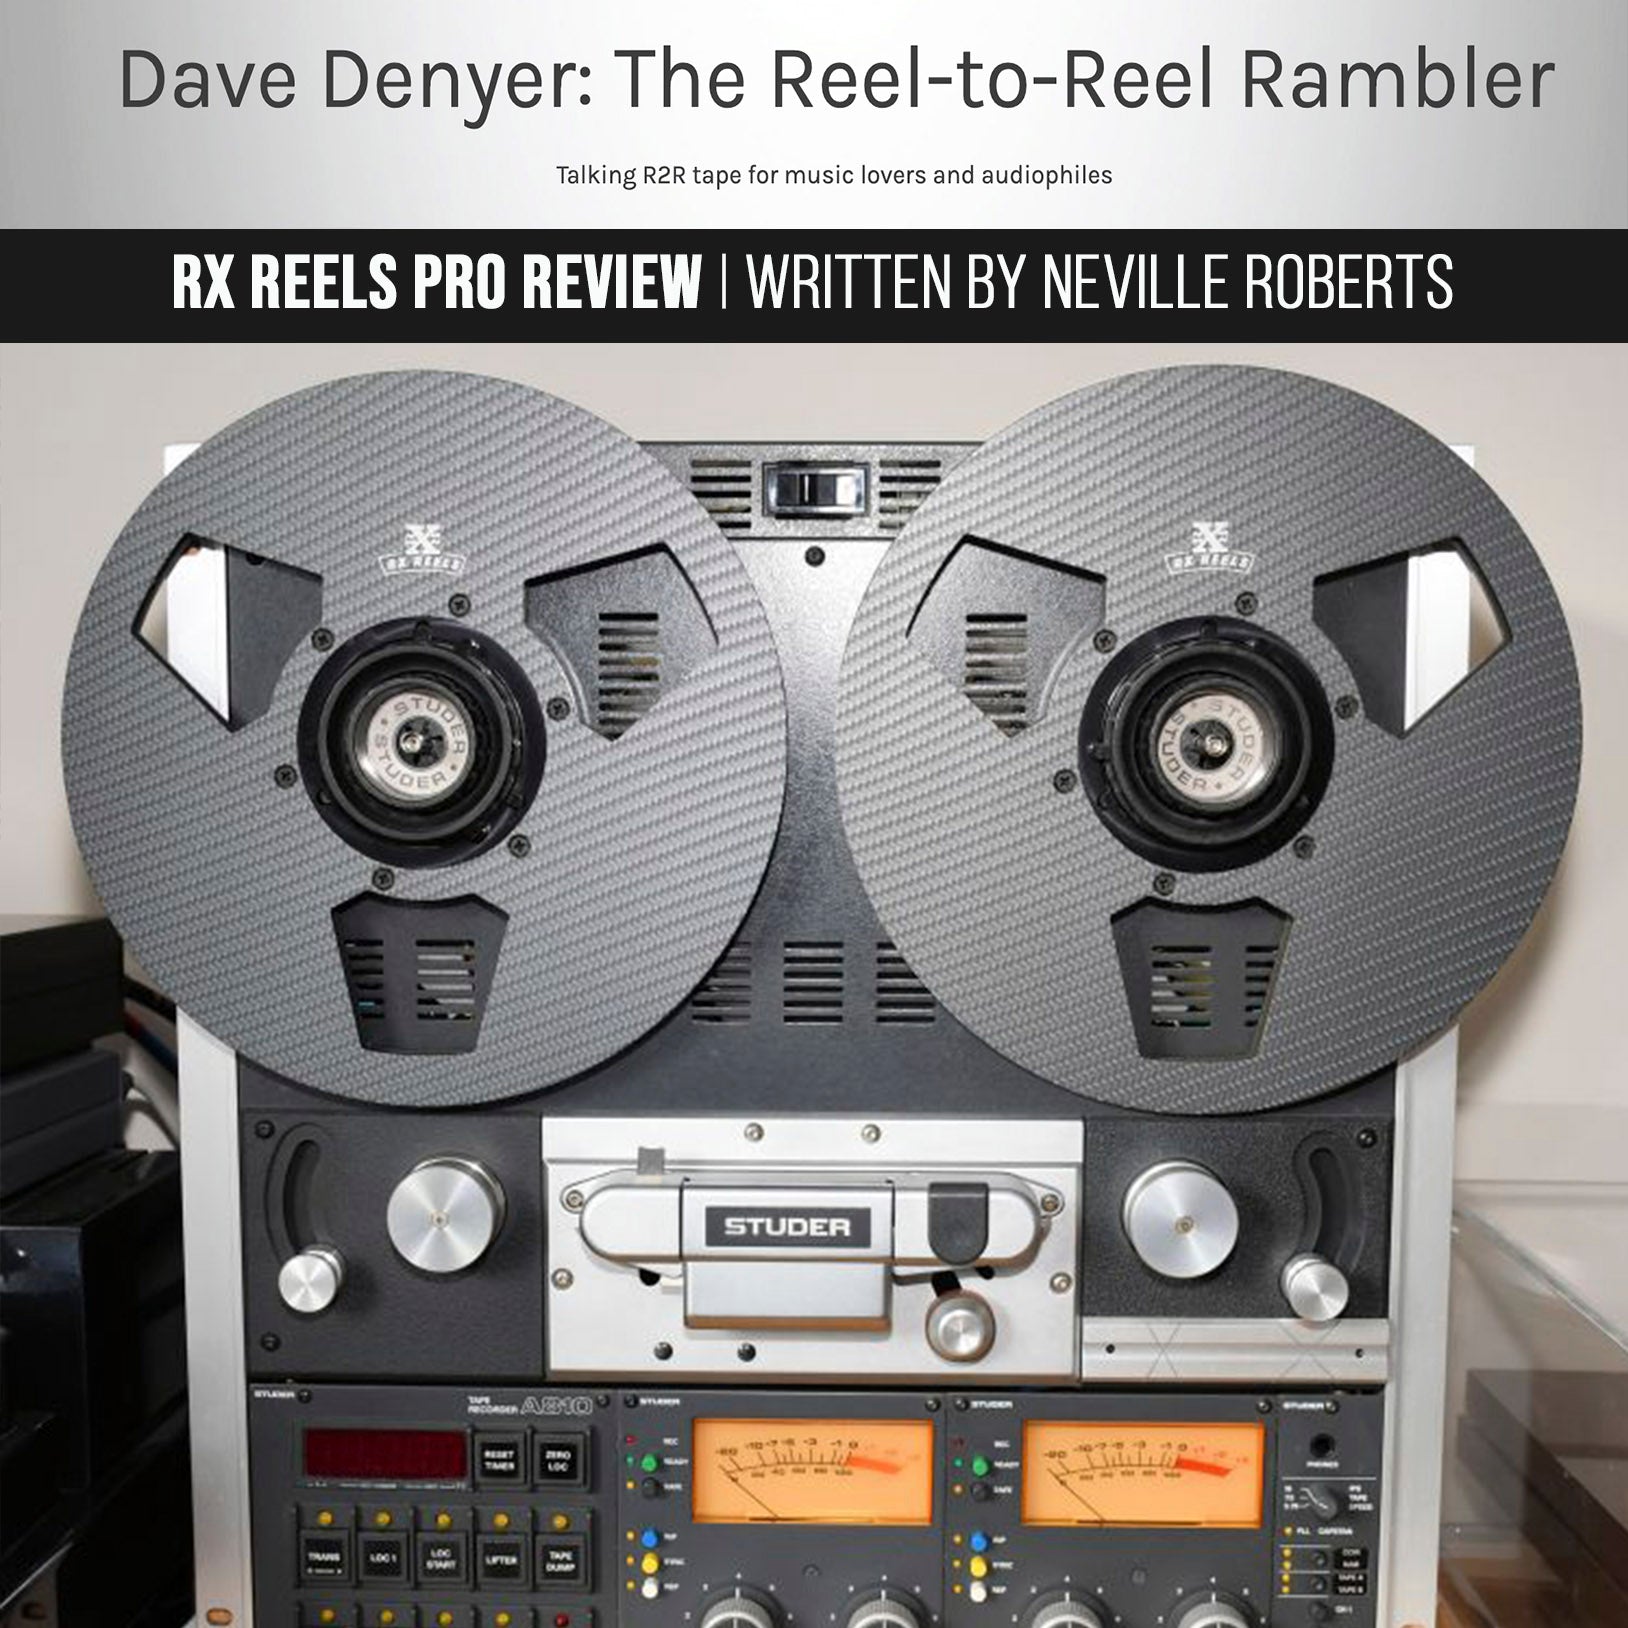 Where to buy tape accessories – Dave Denyer: The Reel-to-Reel Rambler